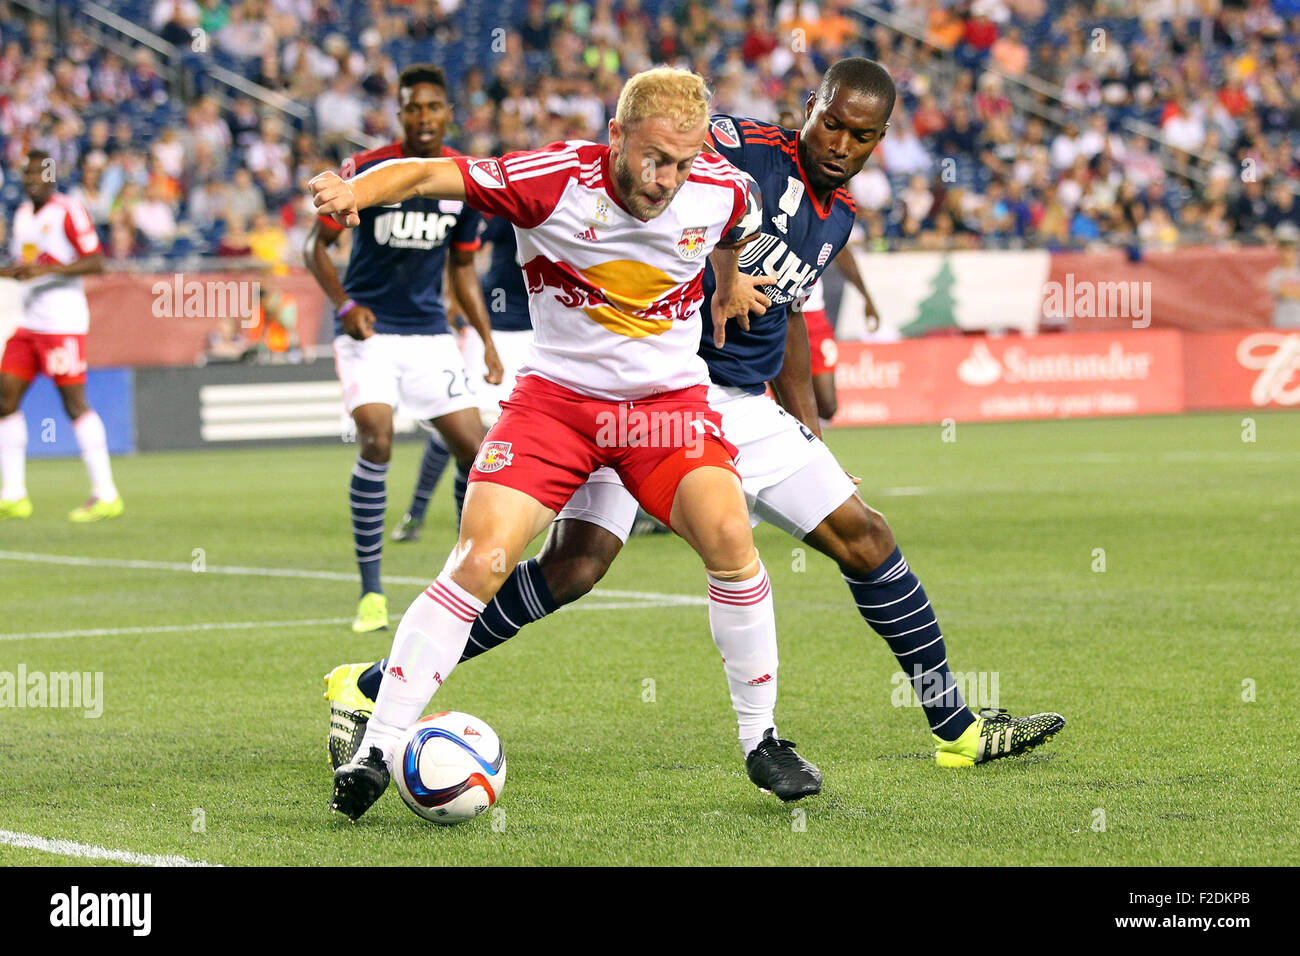 Foxborough, Massachussetts, USA. 16th September, 2015. New England Revolution defender Jose Goncalves (23) and New York Red Bulls forward Mike Grella (13) in action during the first half of the MLS game between the New England Revolution and New York Red Bulls at Gillette Stadium. Credit:  Cal Sport Media/Alamy Live News Stock Photo